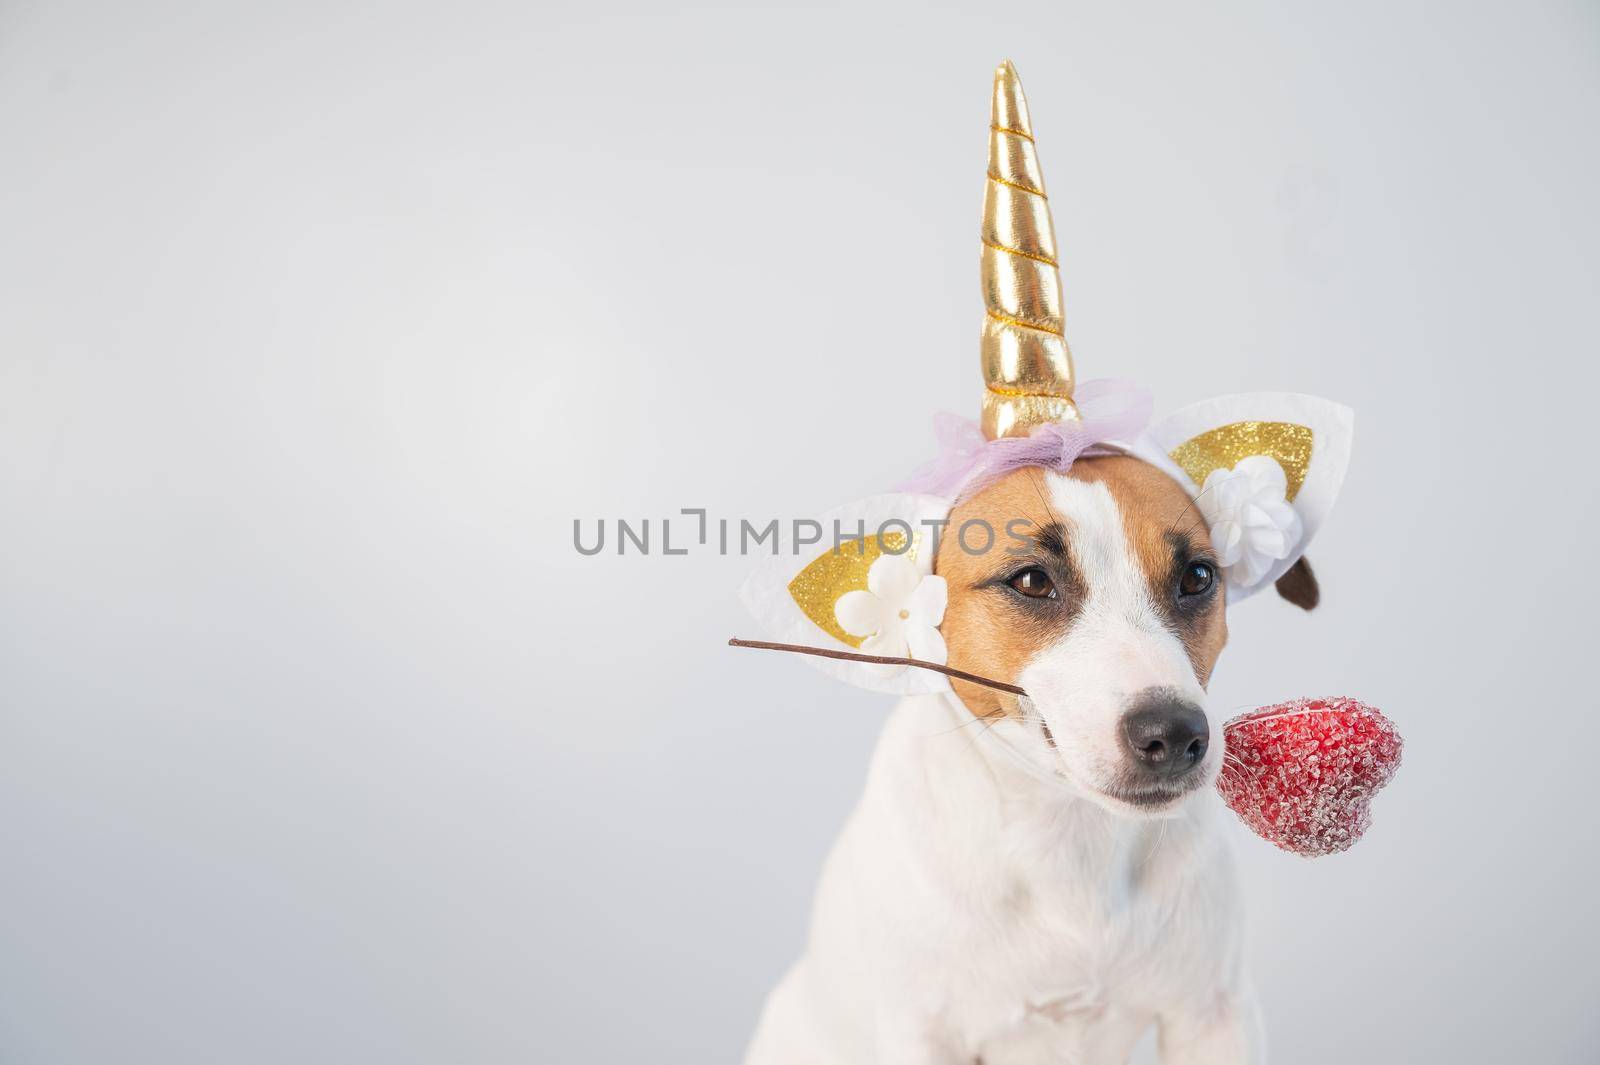 Cute jack russell terrier dog in a unicorn headband holding a heart on a white background